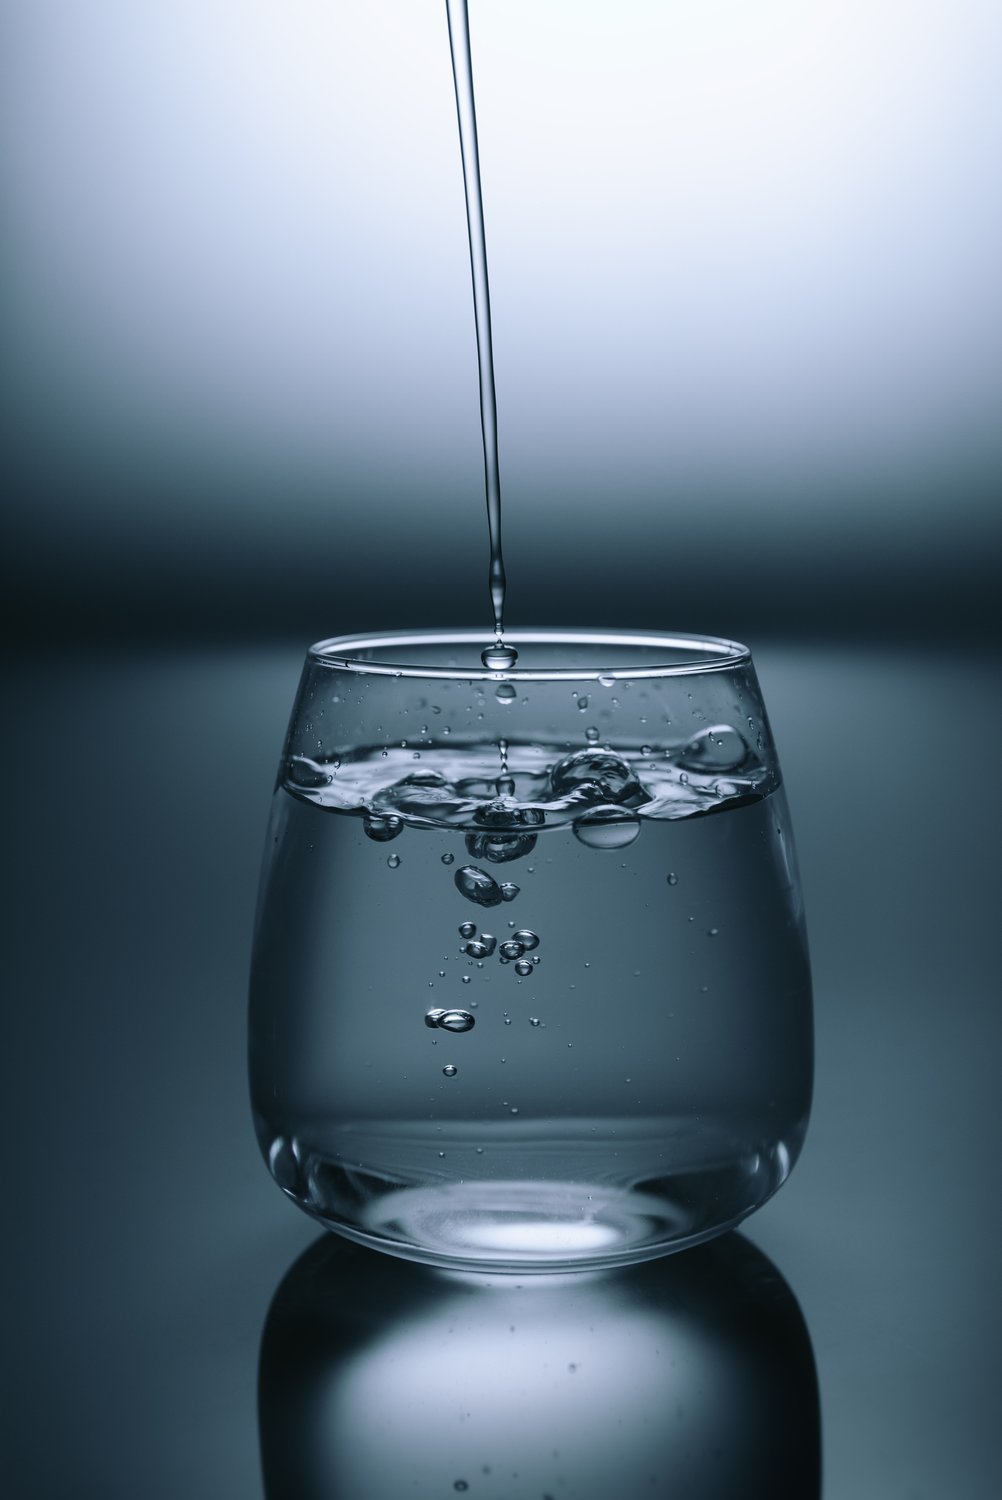 A clear glass being filled from above with water